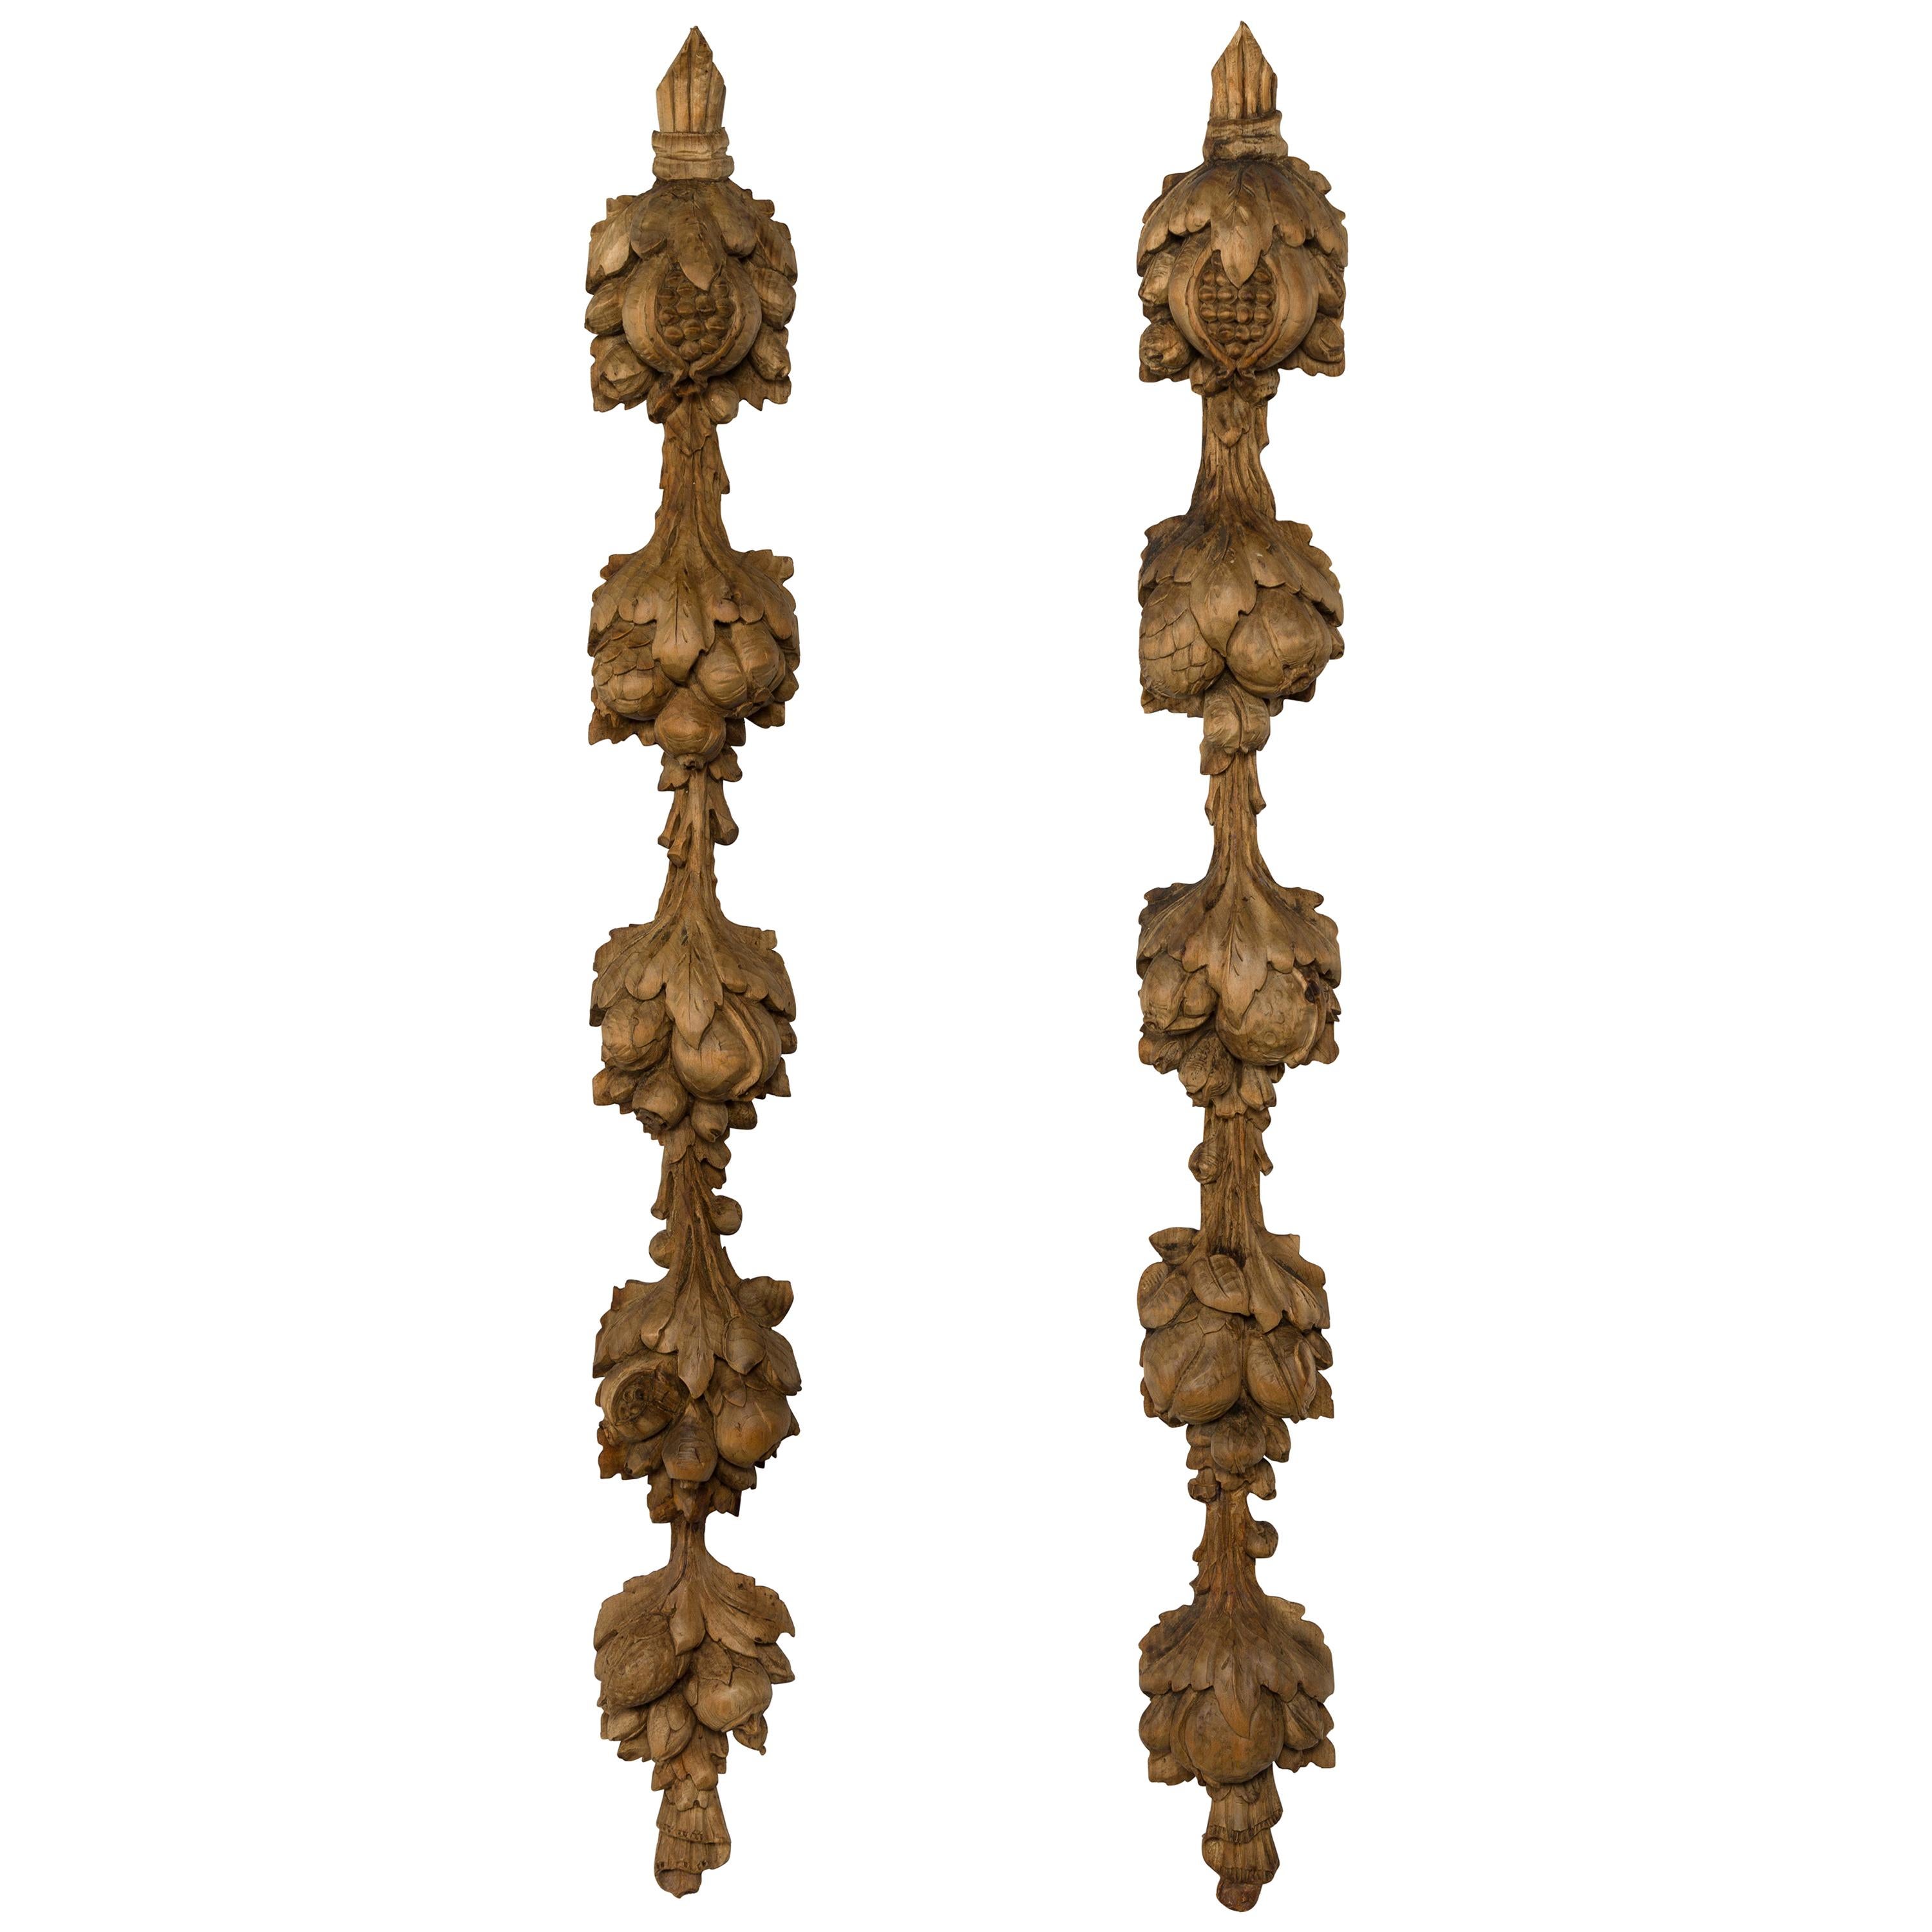 Pair of 1880s Italian Carved Wooden Wall Carvings Depicting Pomegranates